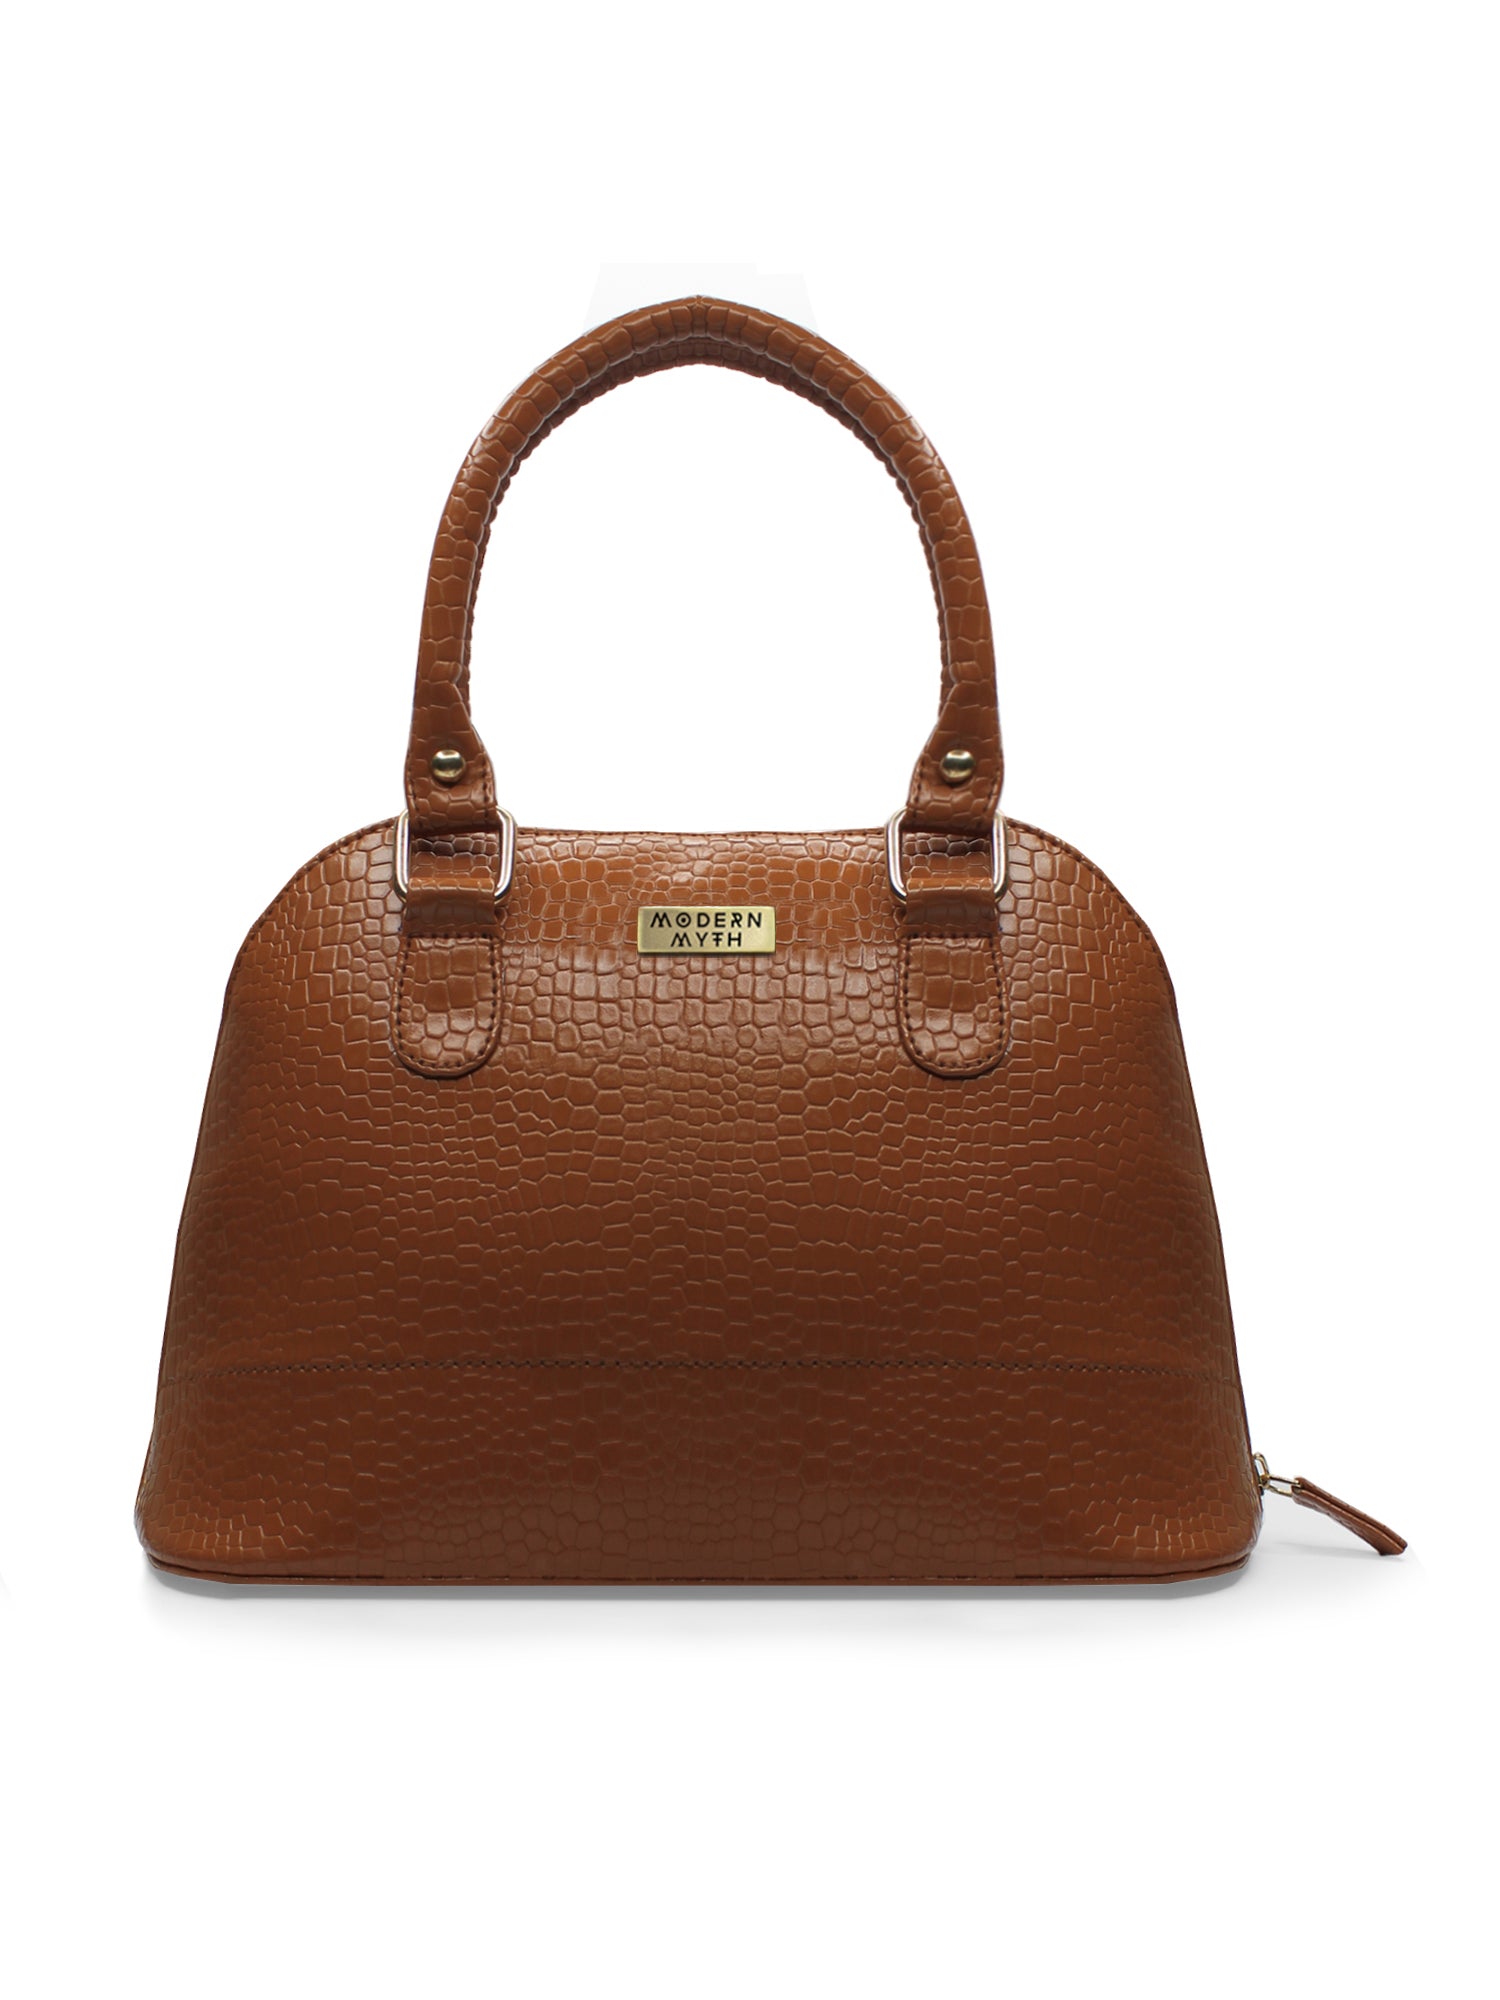 Gucci Ladies Bags Online India - Shop Now At Dilli Bazar